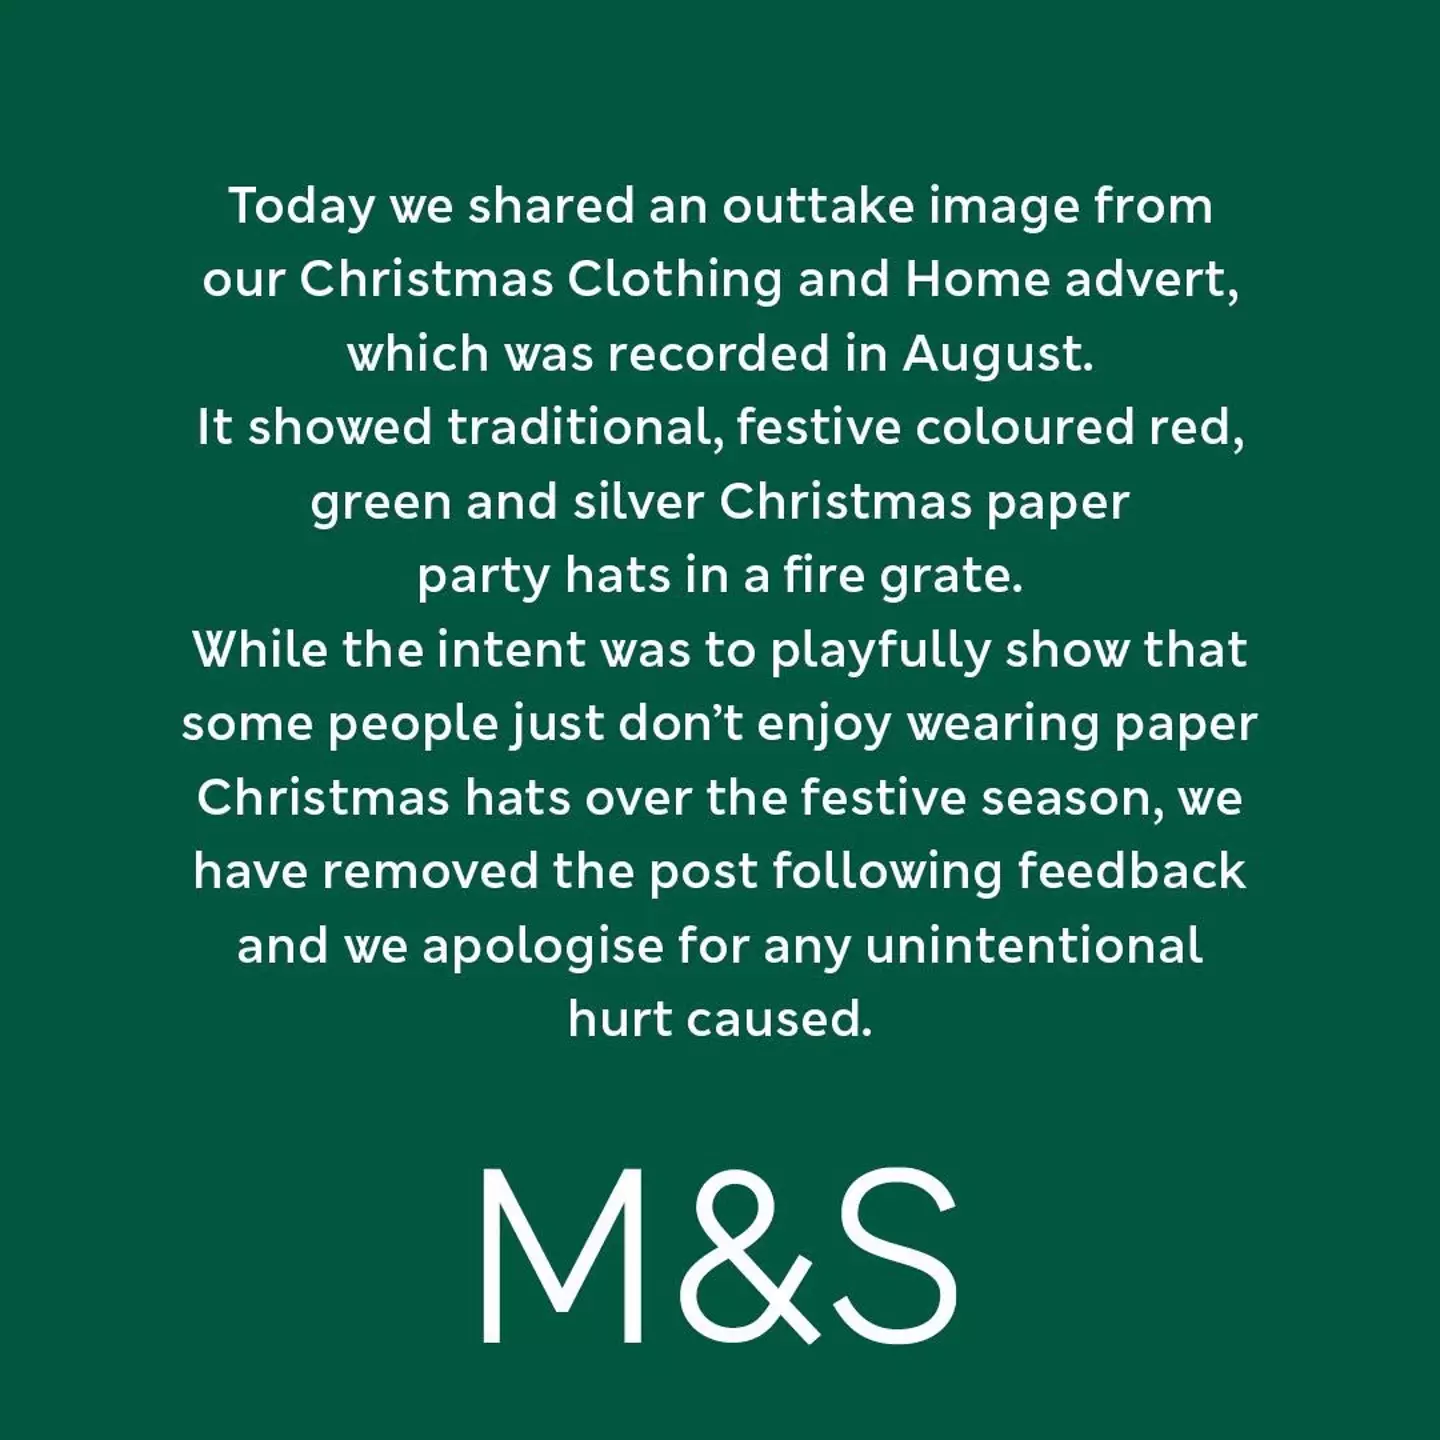 M&S apologised to their customers.